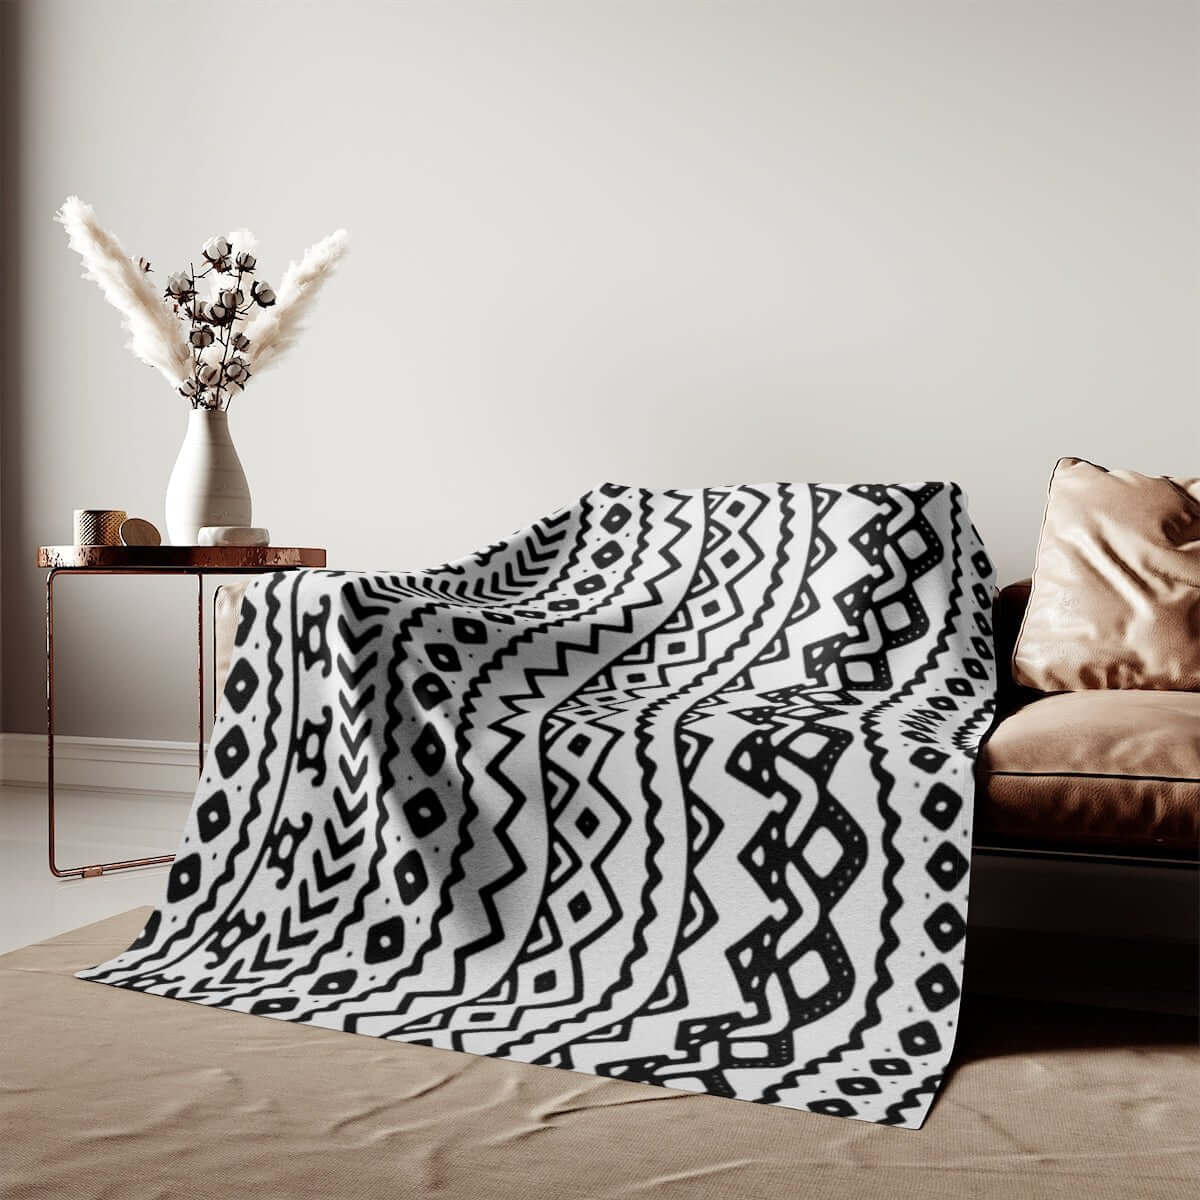 African Print Inspired Blankets - Bynelo